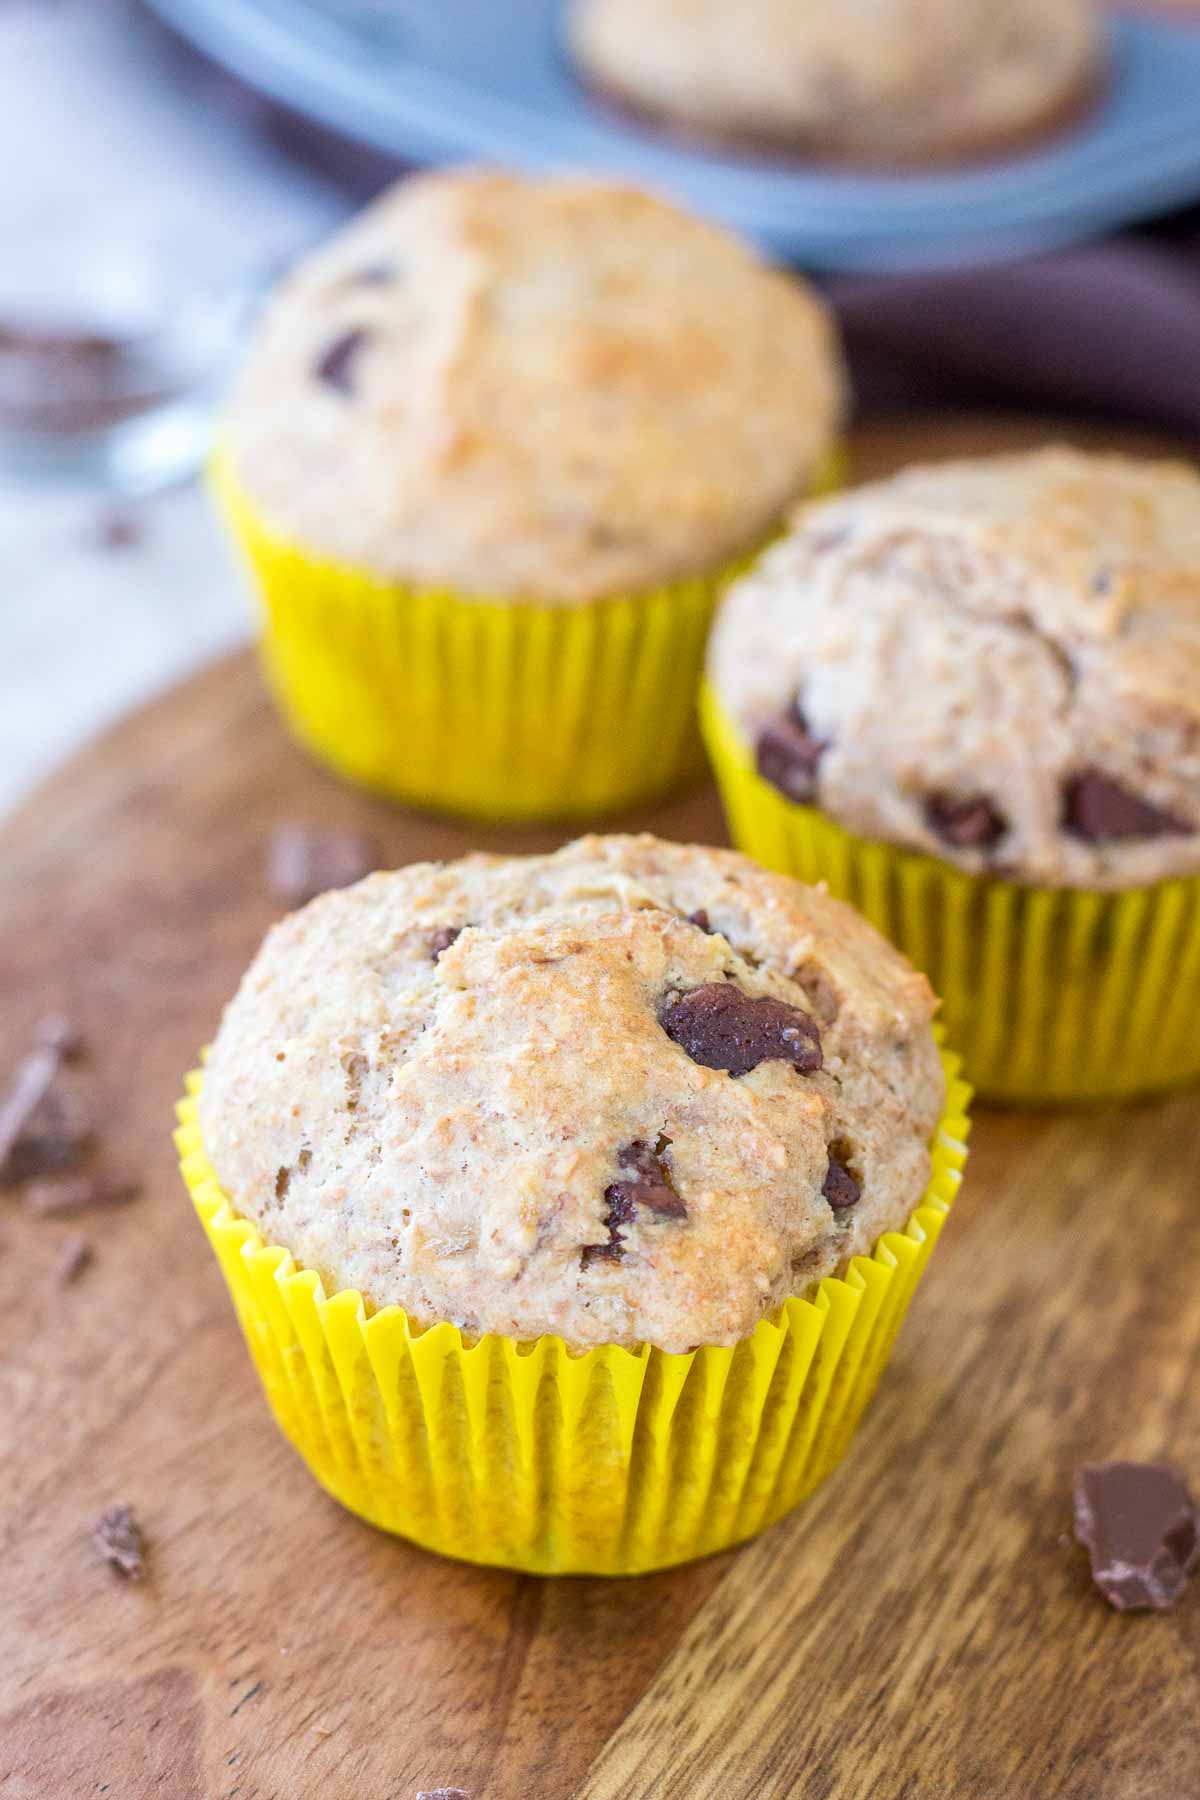 Chocolate Chip Banana Muffins served on a wooden plate.